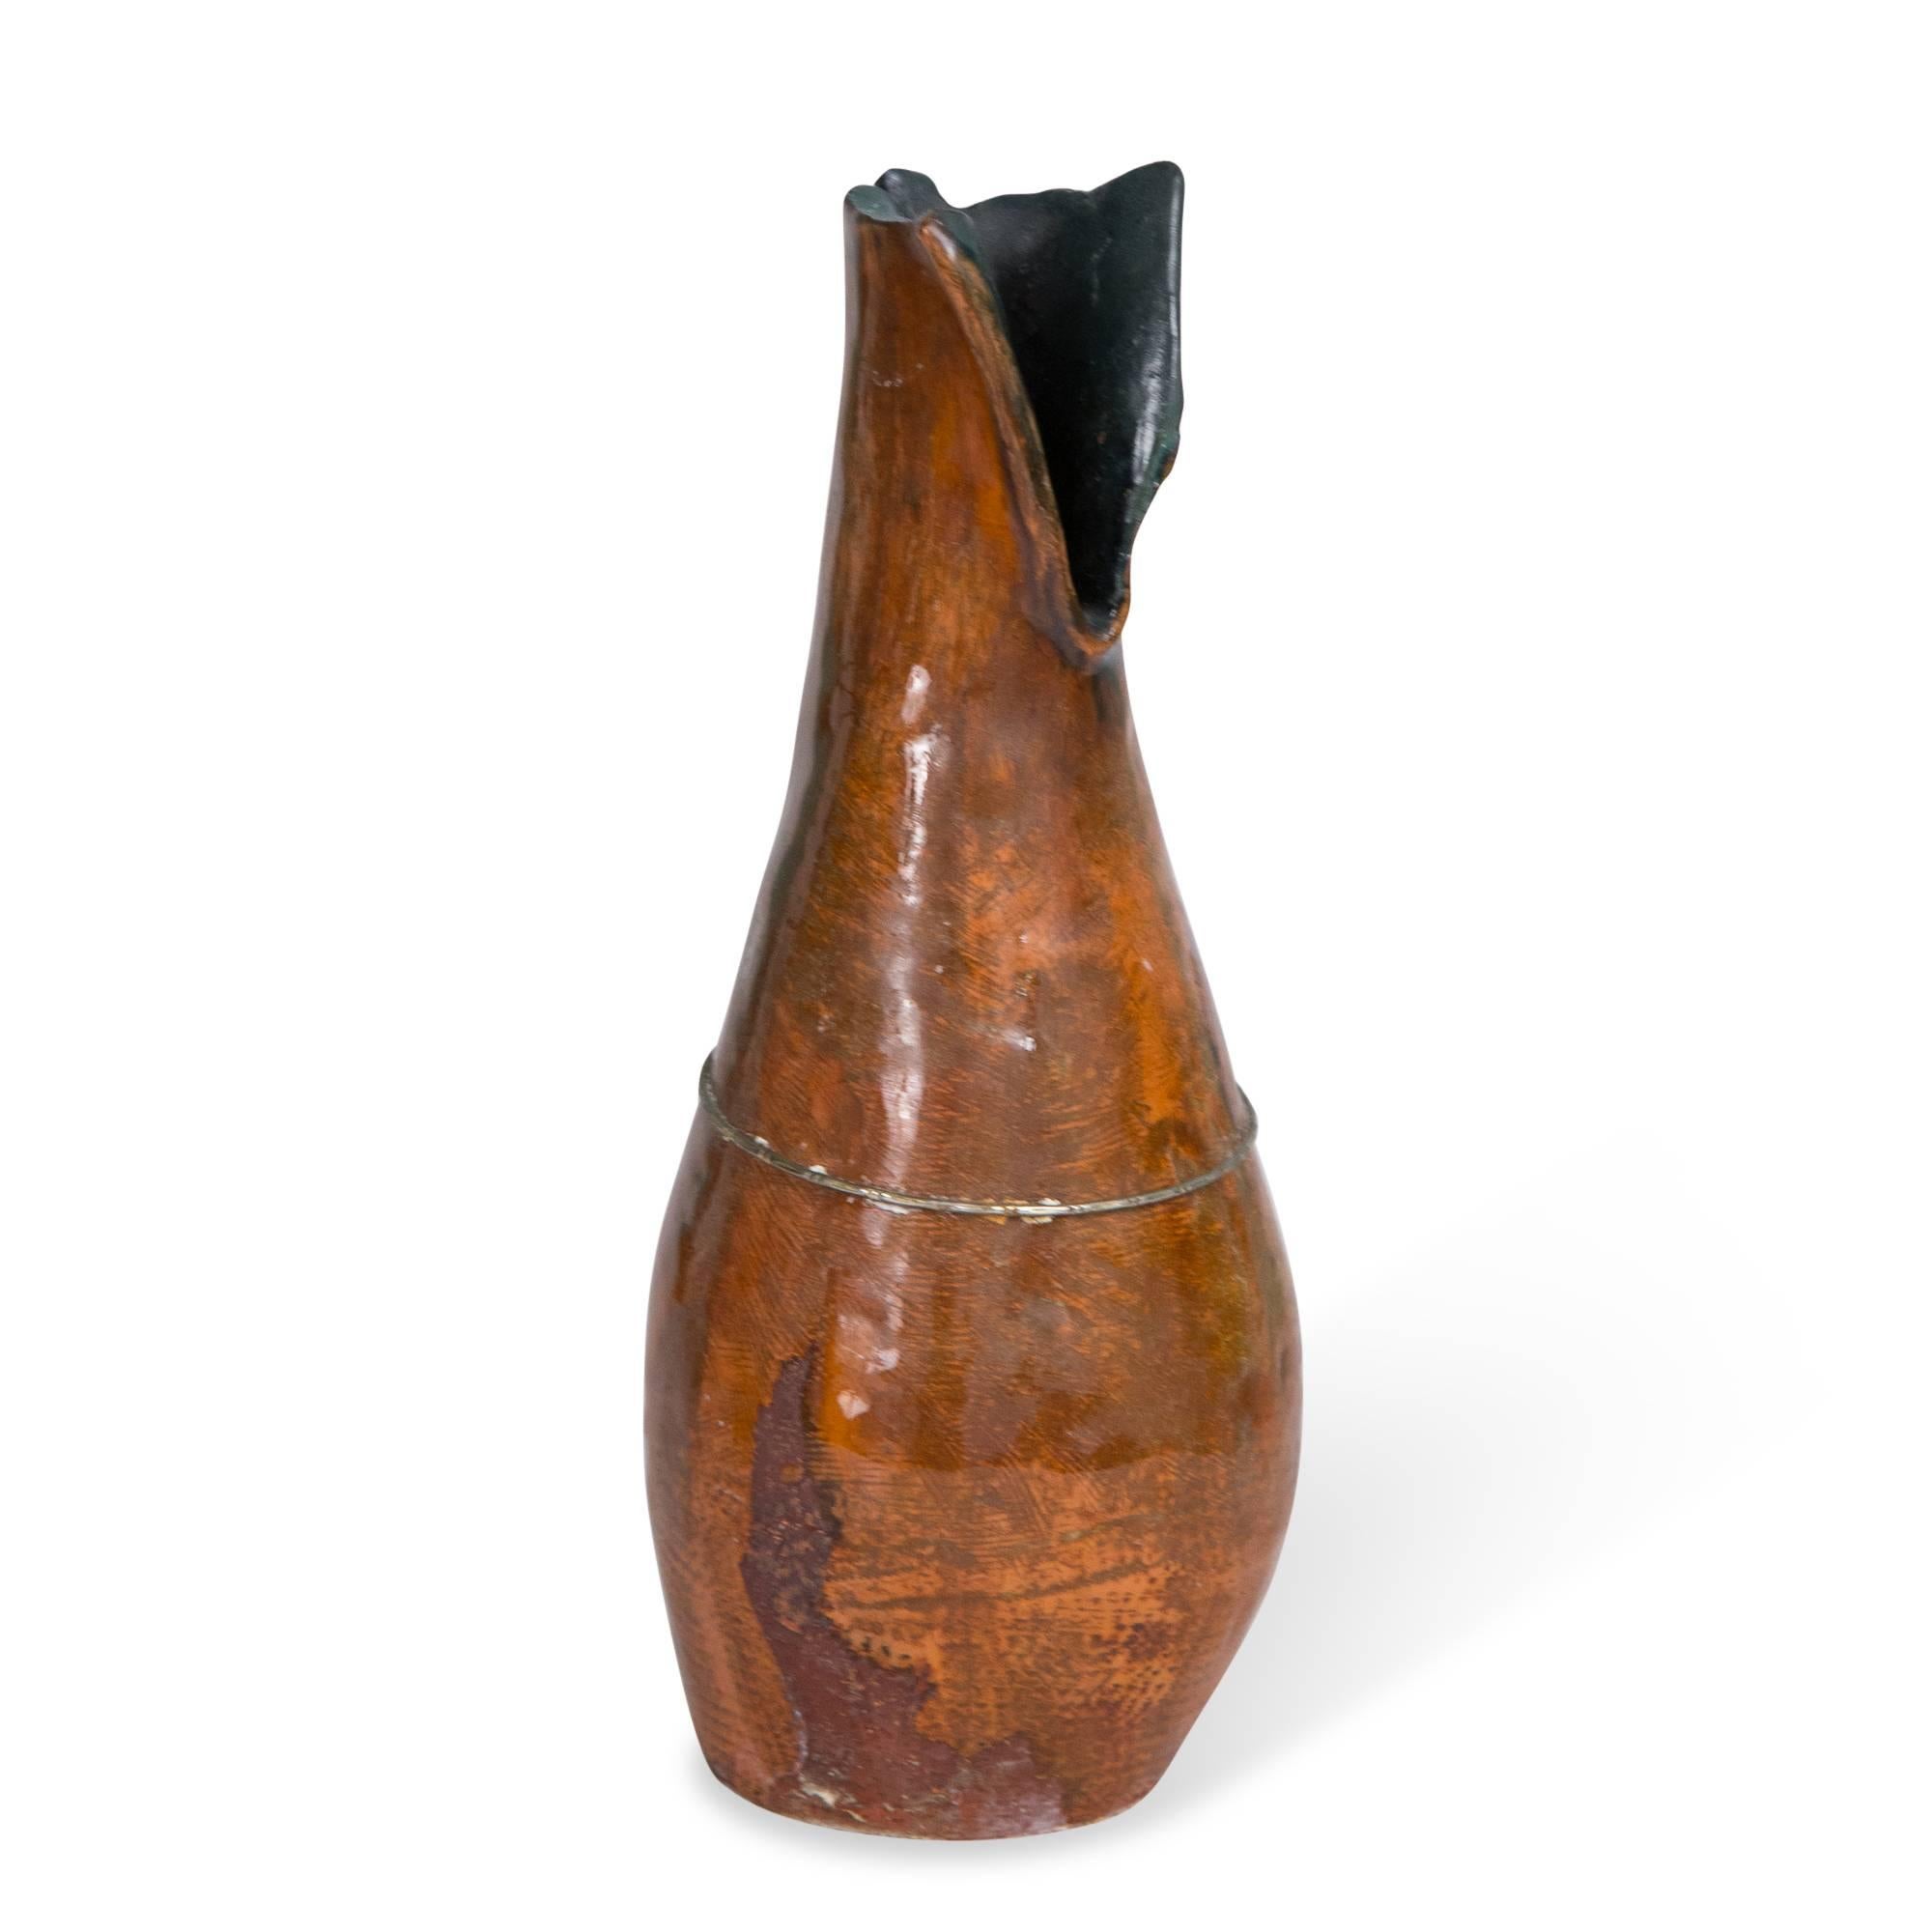 Red glazed hand built ceramic vase, with rough opening at top, and applied metal wire around body, by Juliette Derel, France, late 20th century. Measures: Height 8 in, diameter 3 in.